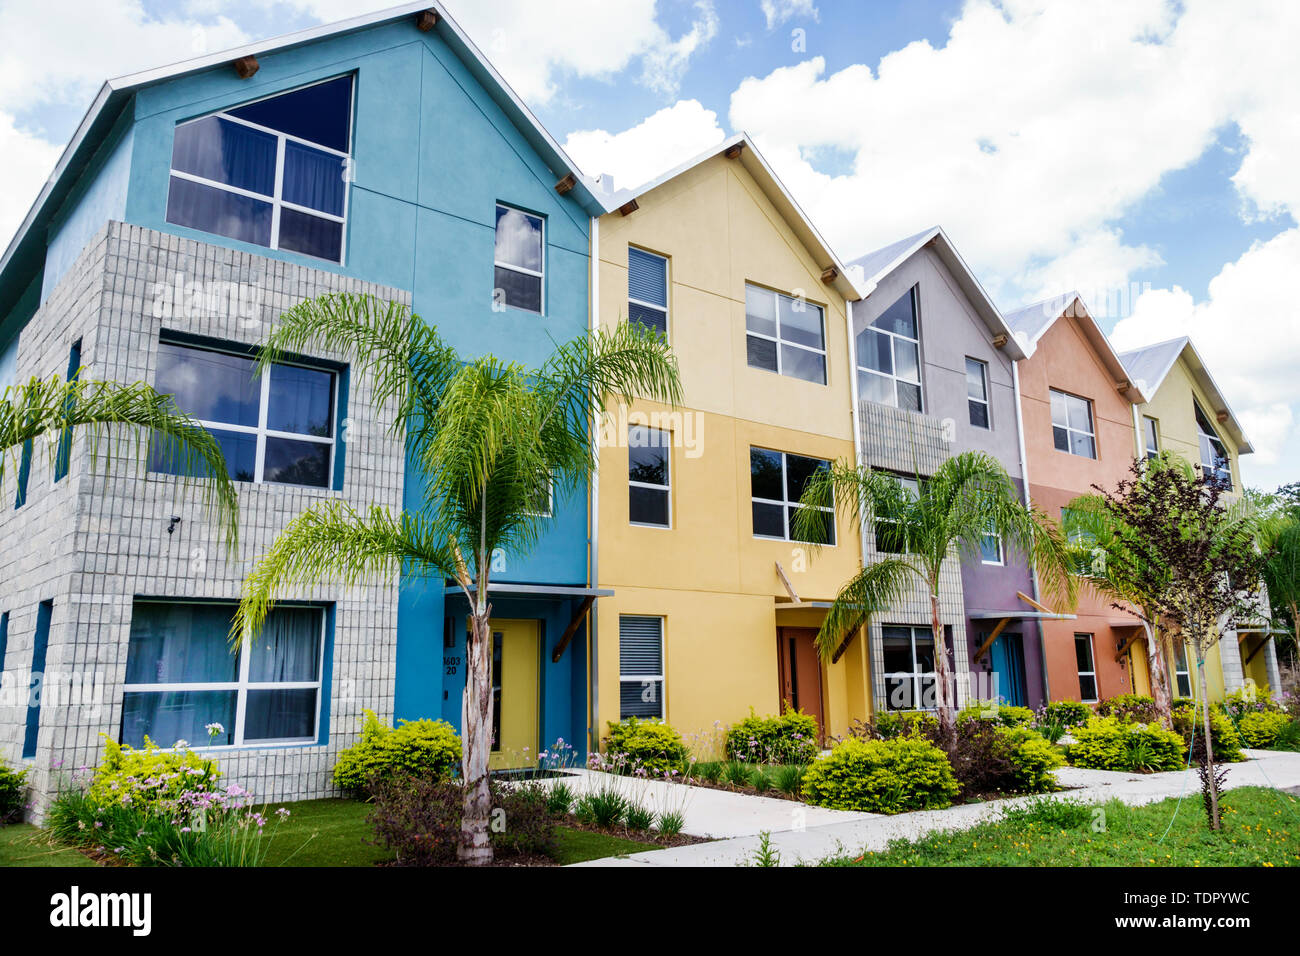 Orlando Florida,Park Lake Highland,Woodward Street,contemporary townhouse,Scandinavian-inspired architecture,brightly painted facade,FL190511043 Stock Photo